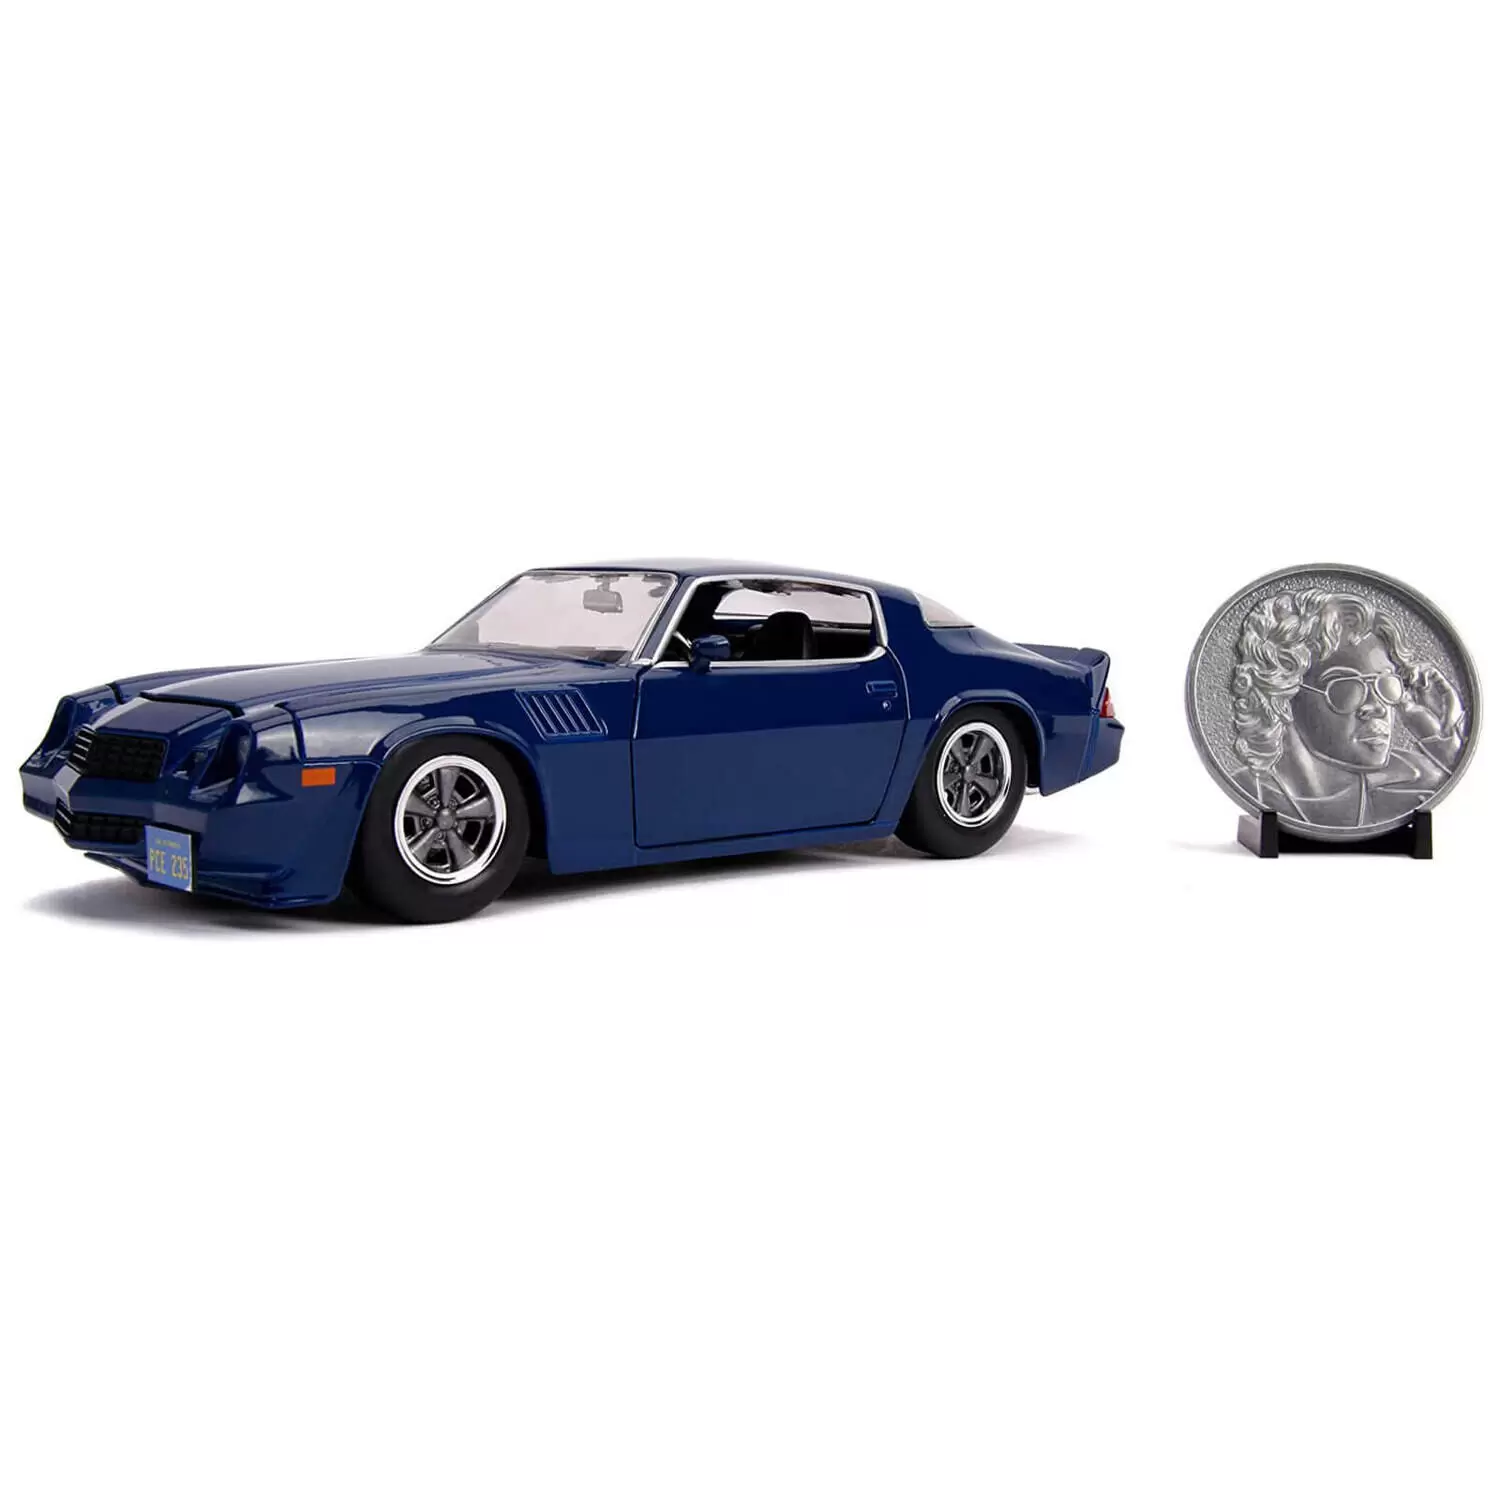 Jada Toys - Billy\'s Chevy Camaro Z28 with Collectible Coin -  Stranger Things - 1979 Chevy Camaro Z28 - 1:24